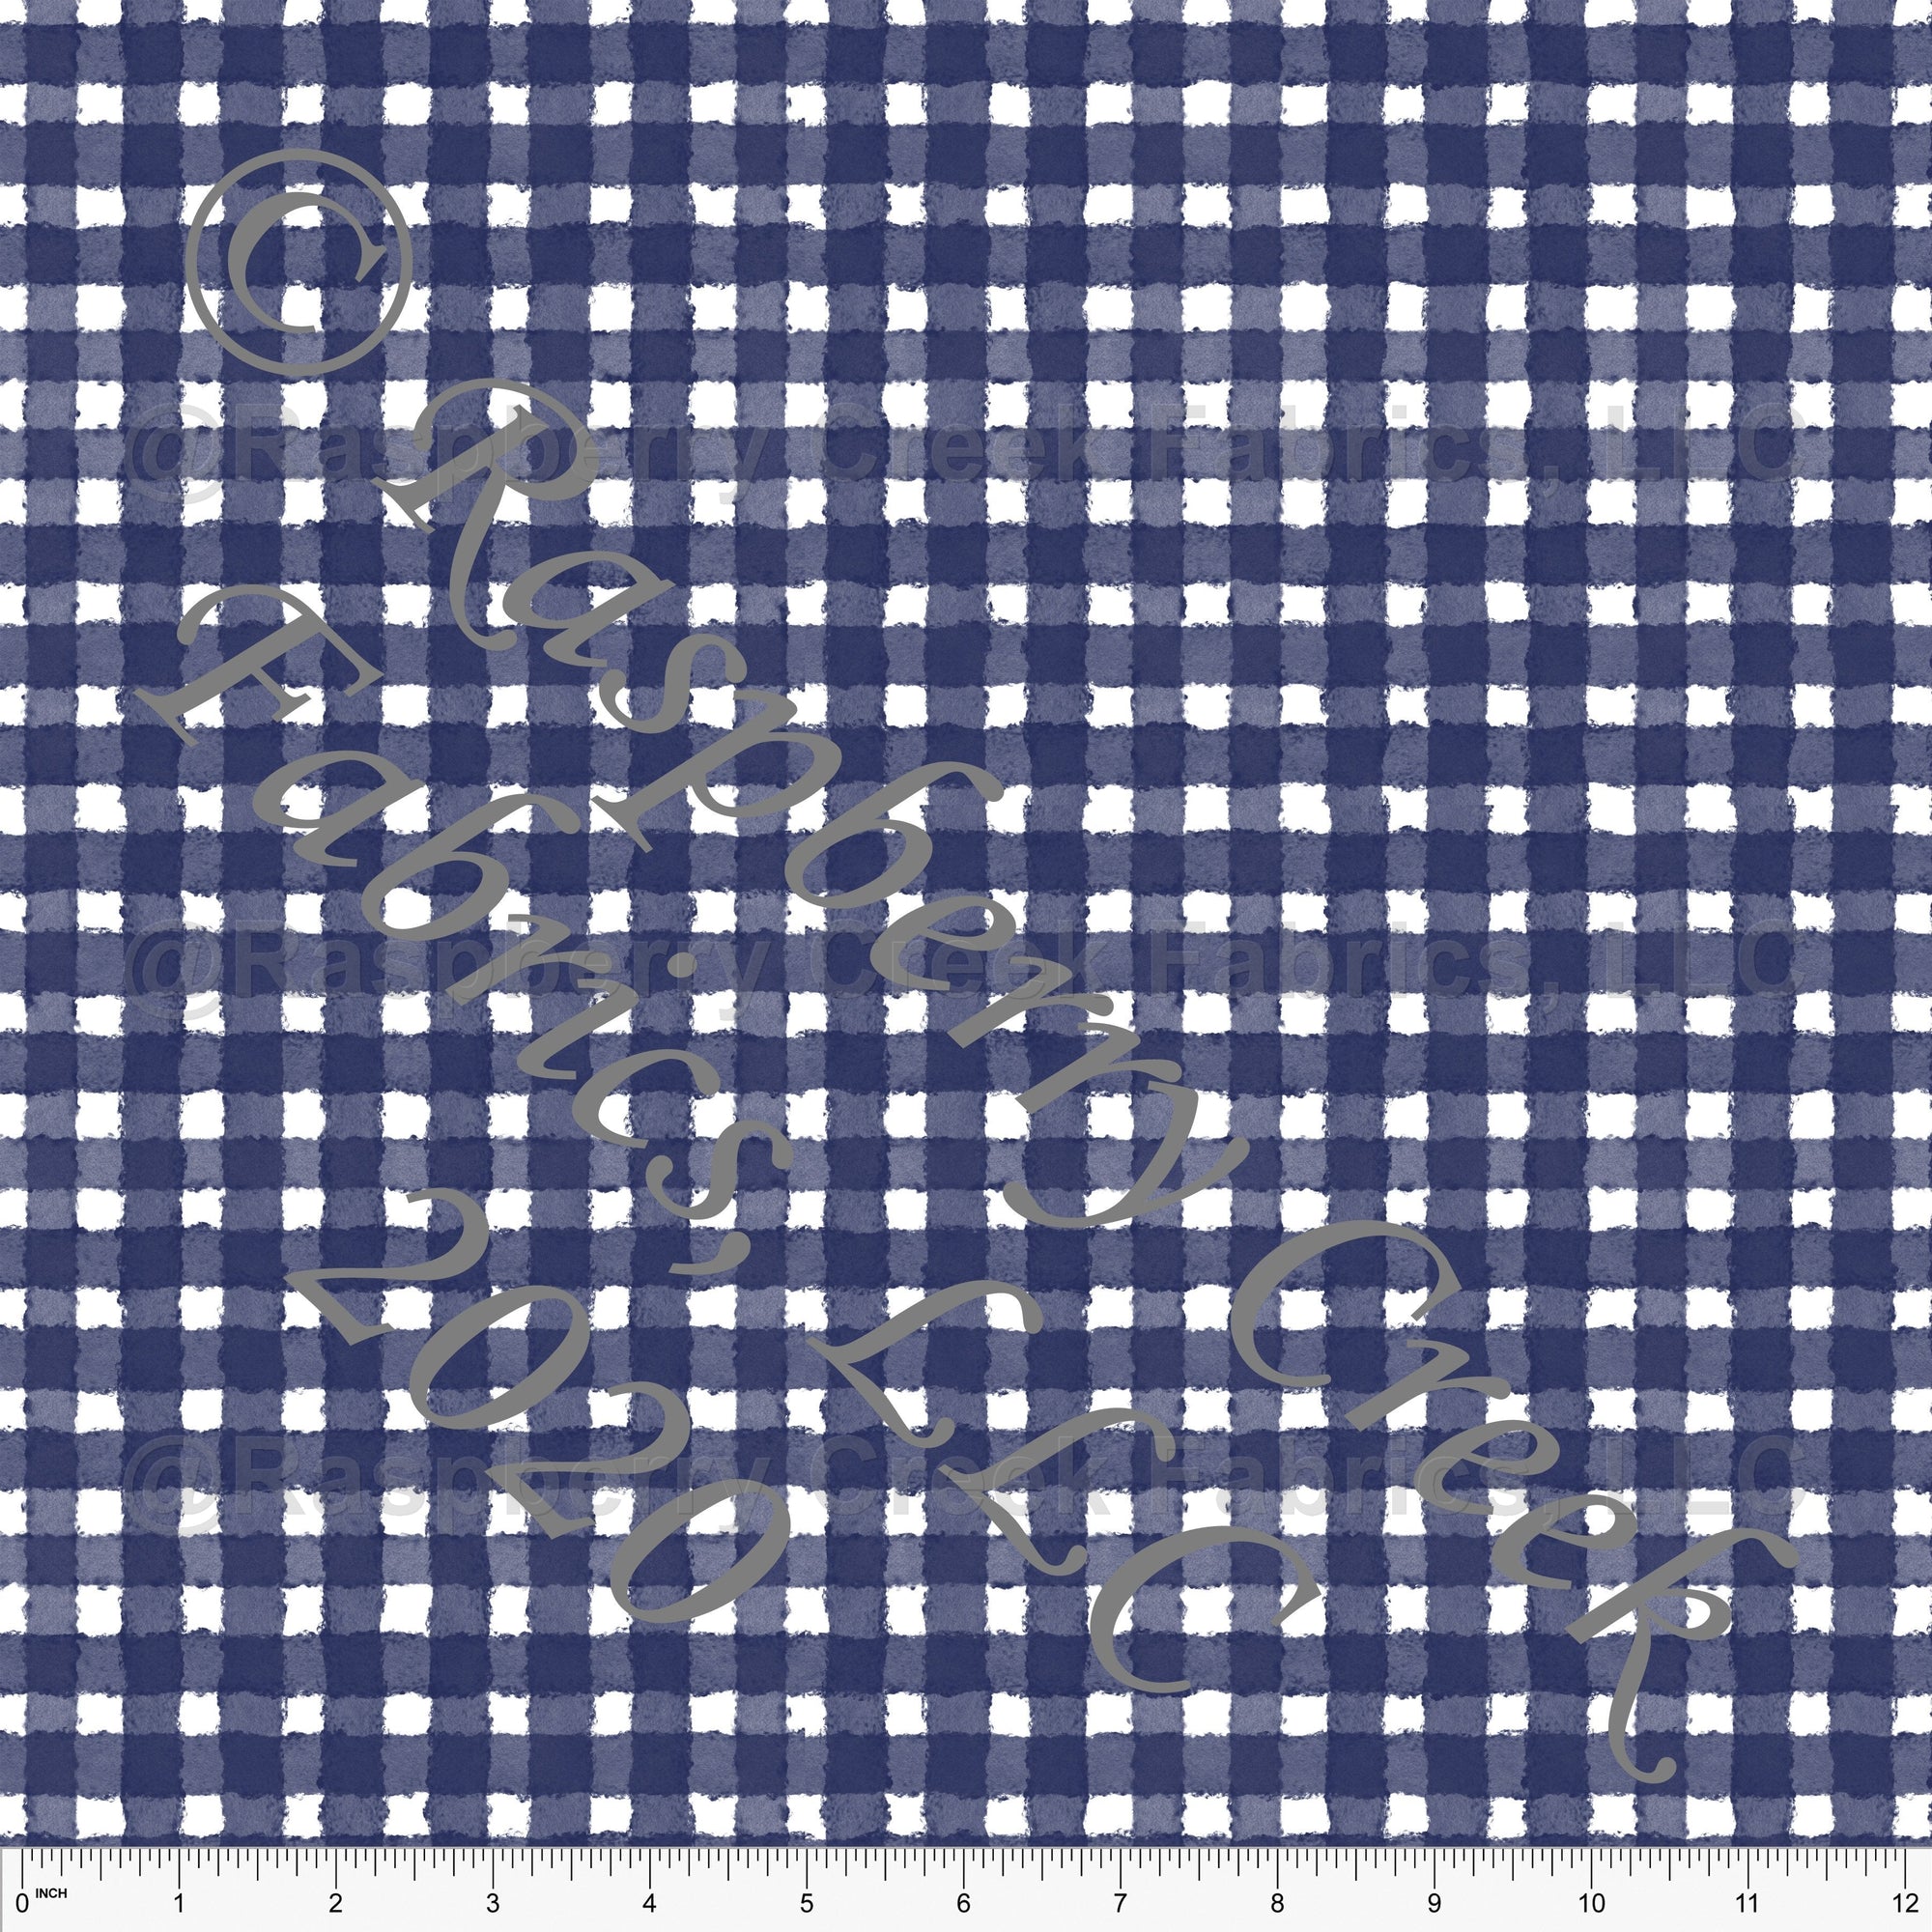 Navy Blue and White Painted Check Gingham, By Bri Powell for Club Fabrics Fabric, Raspberry Creek Fabrics, watermarked